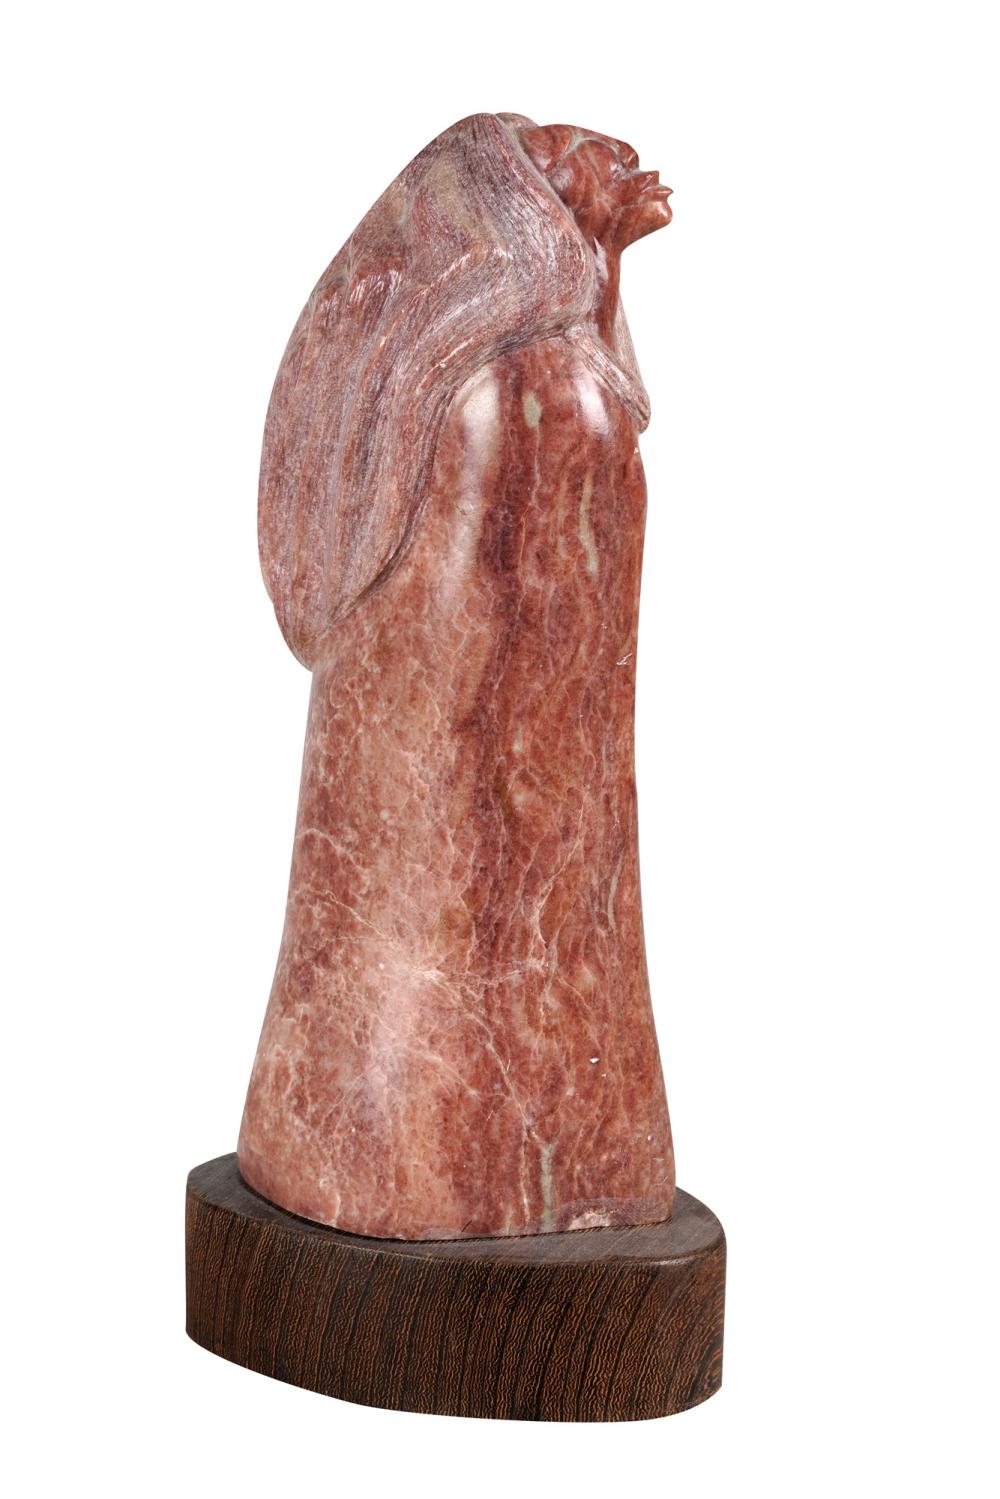 CARVED STONE FIGURE OF A NATIVE